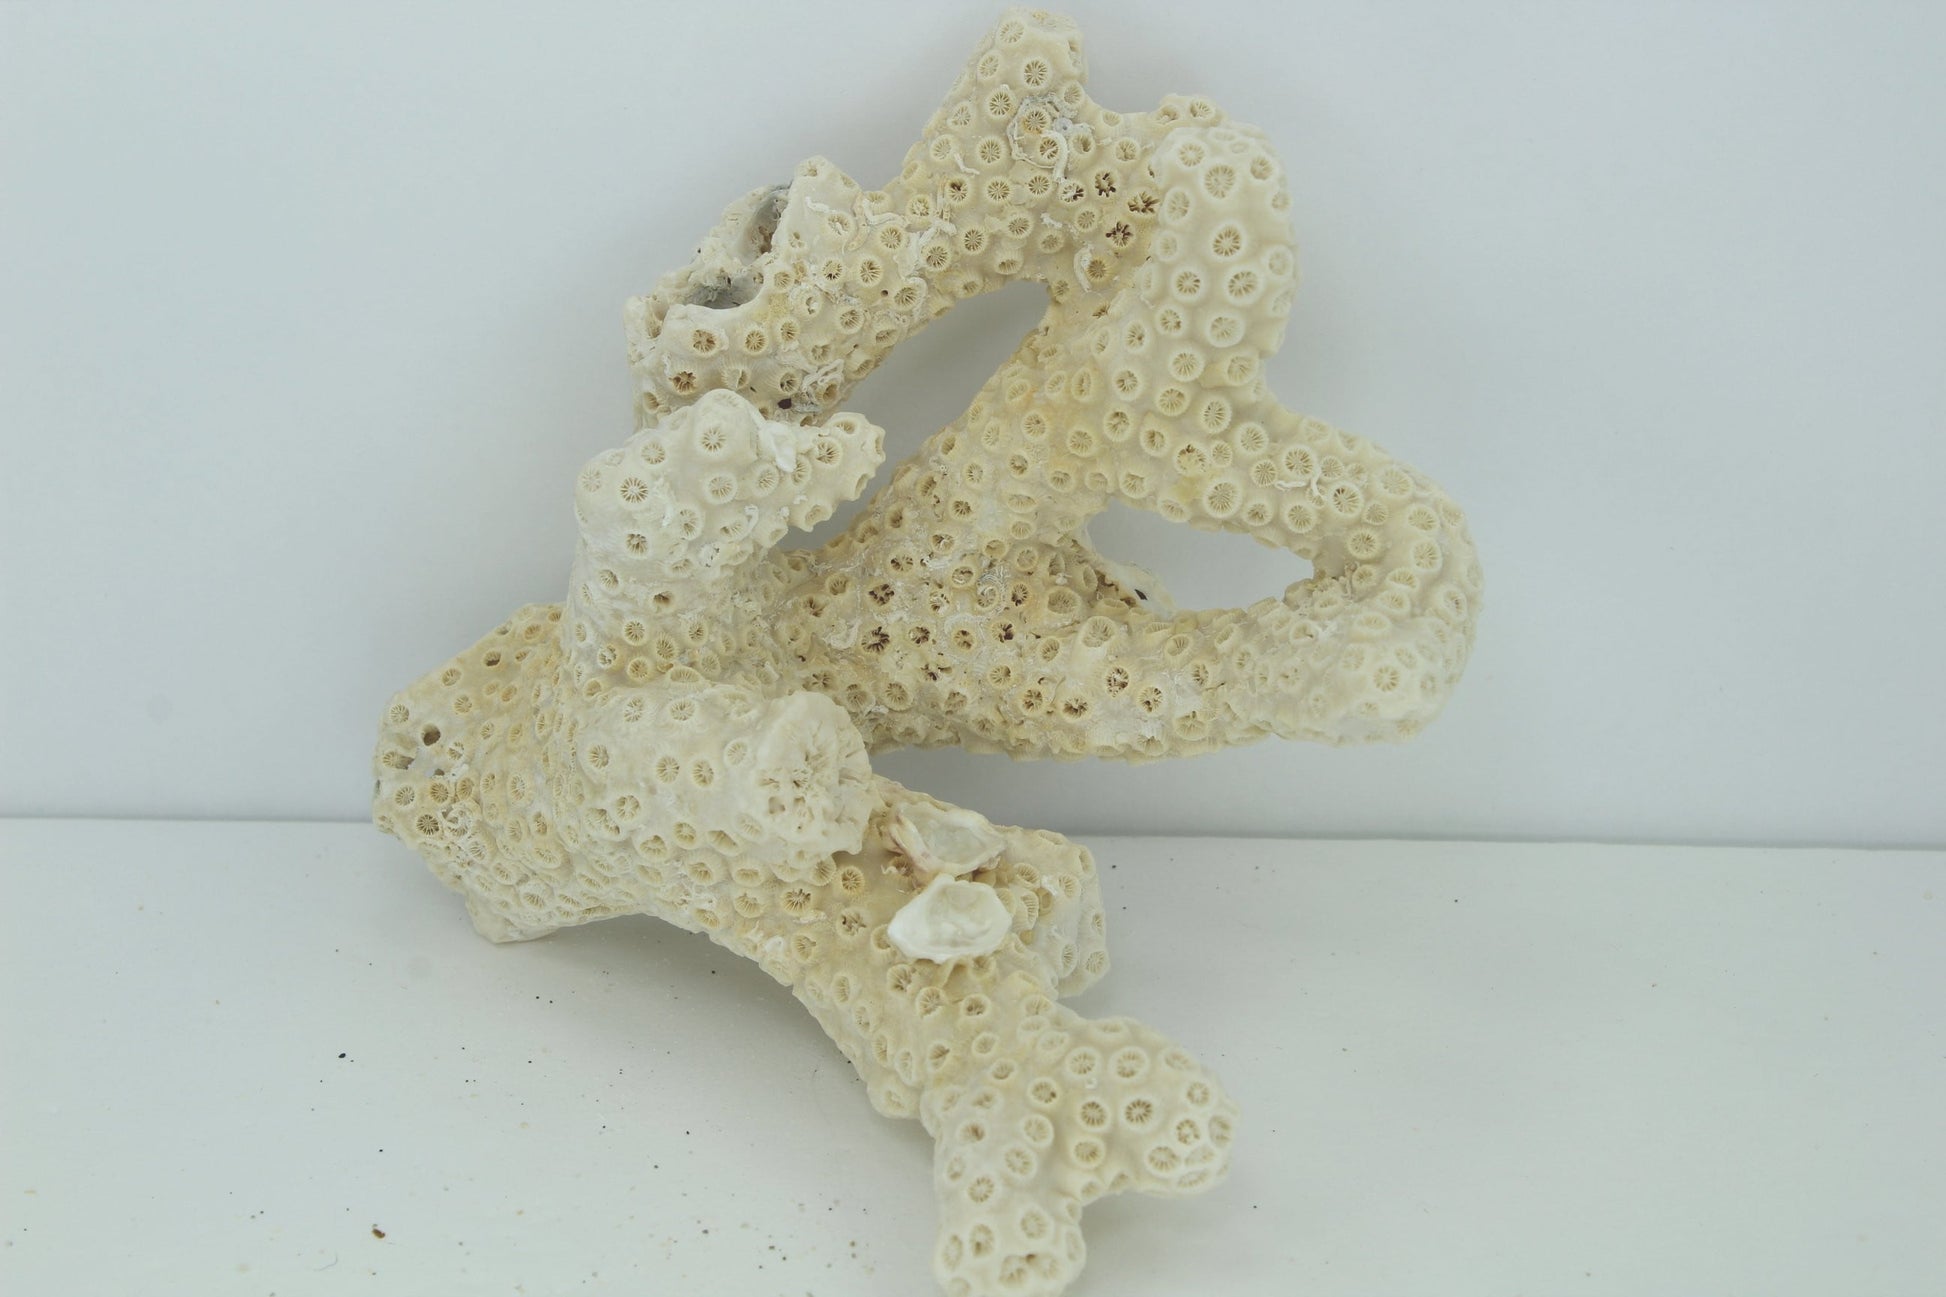 Natural Star Coral Tree shape 1960s Estate Collection Aquarium Shell Art Collectibles heavy